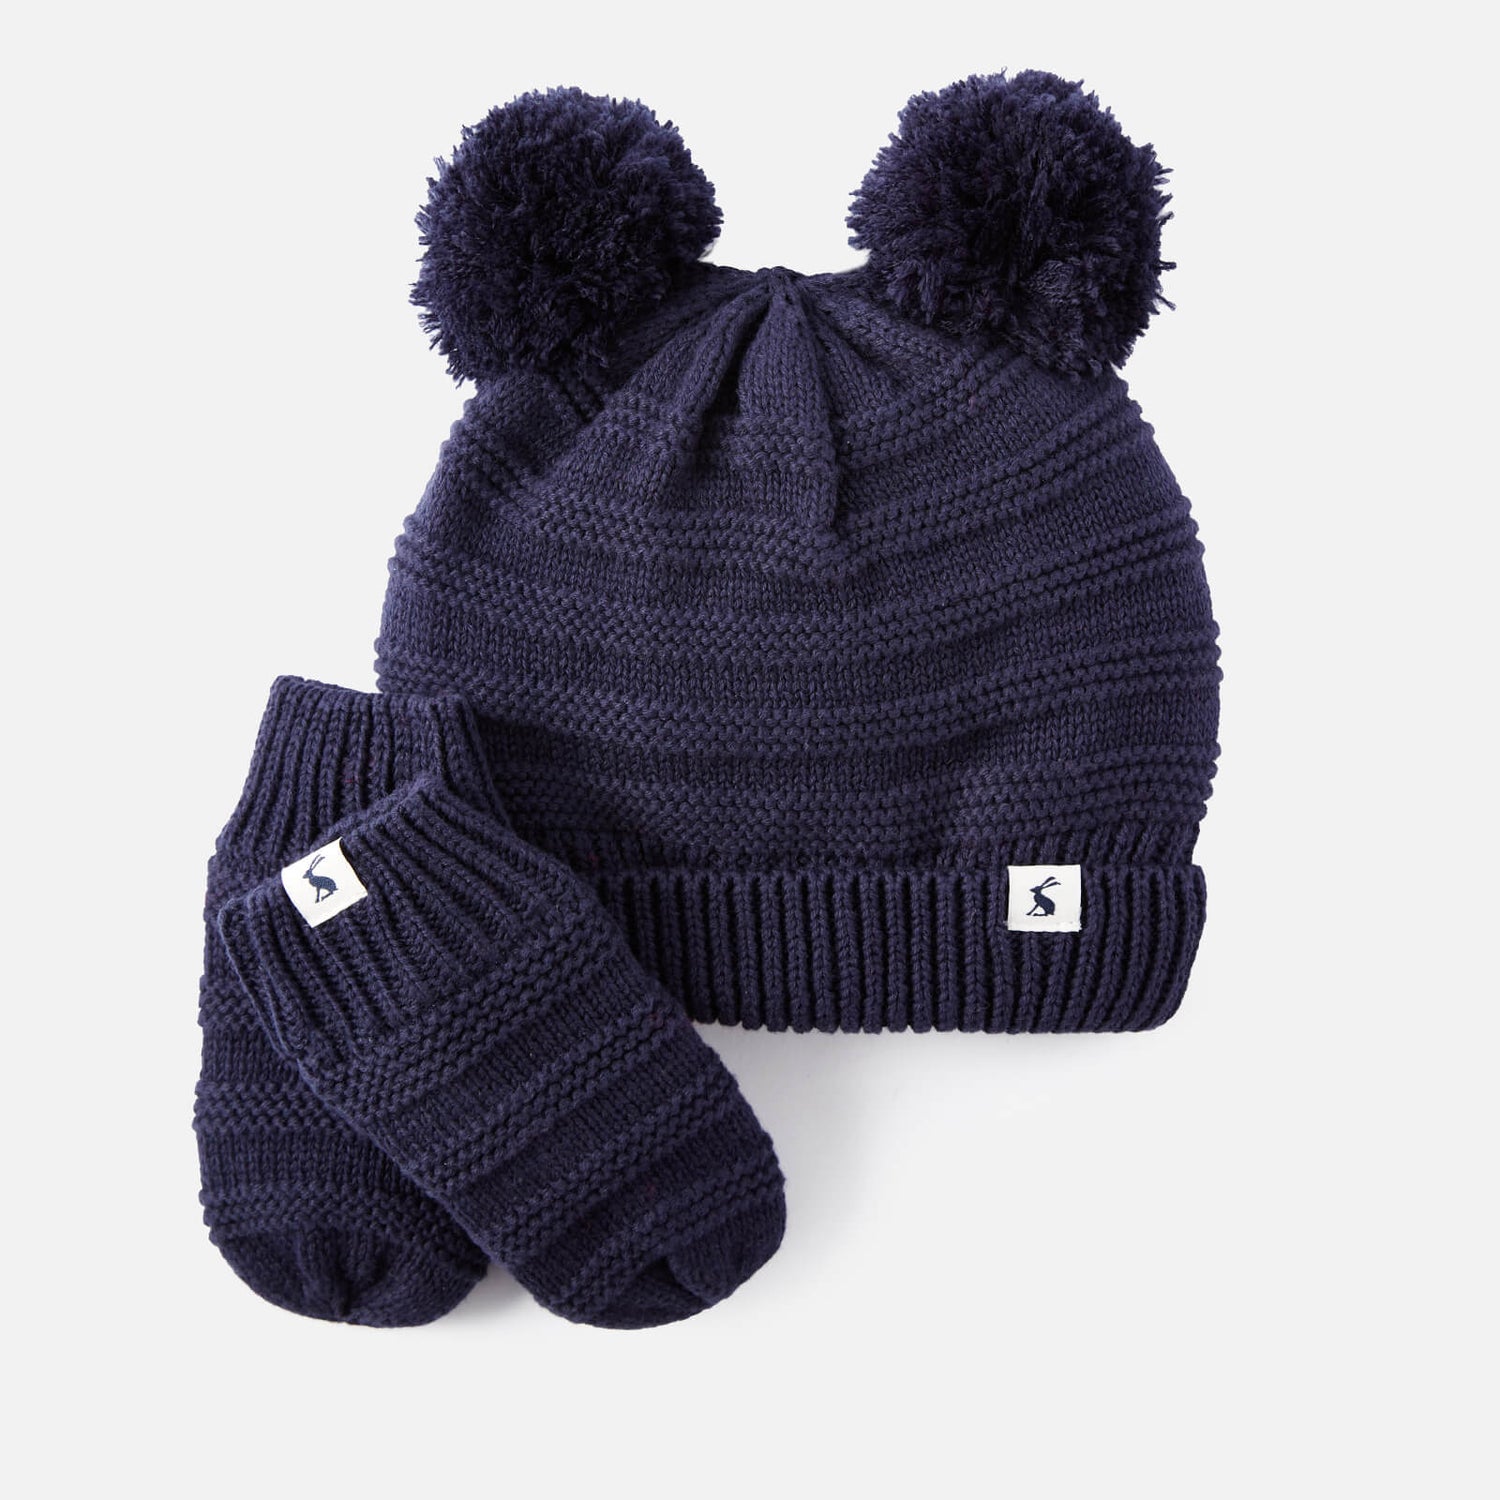 Joules Baby Pompom Knitted Hat and Gloves Set - 6-12 months